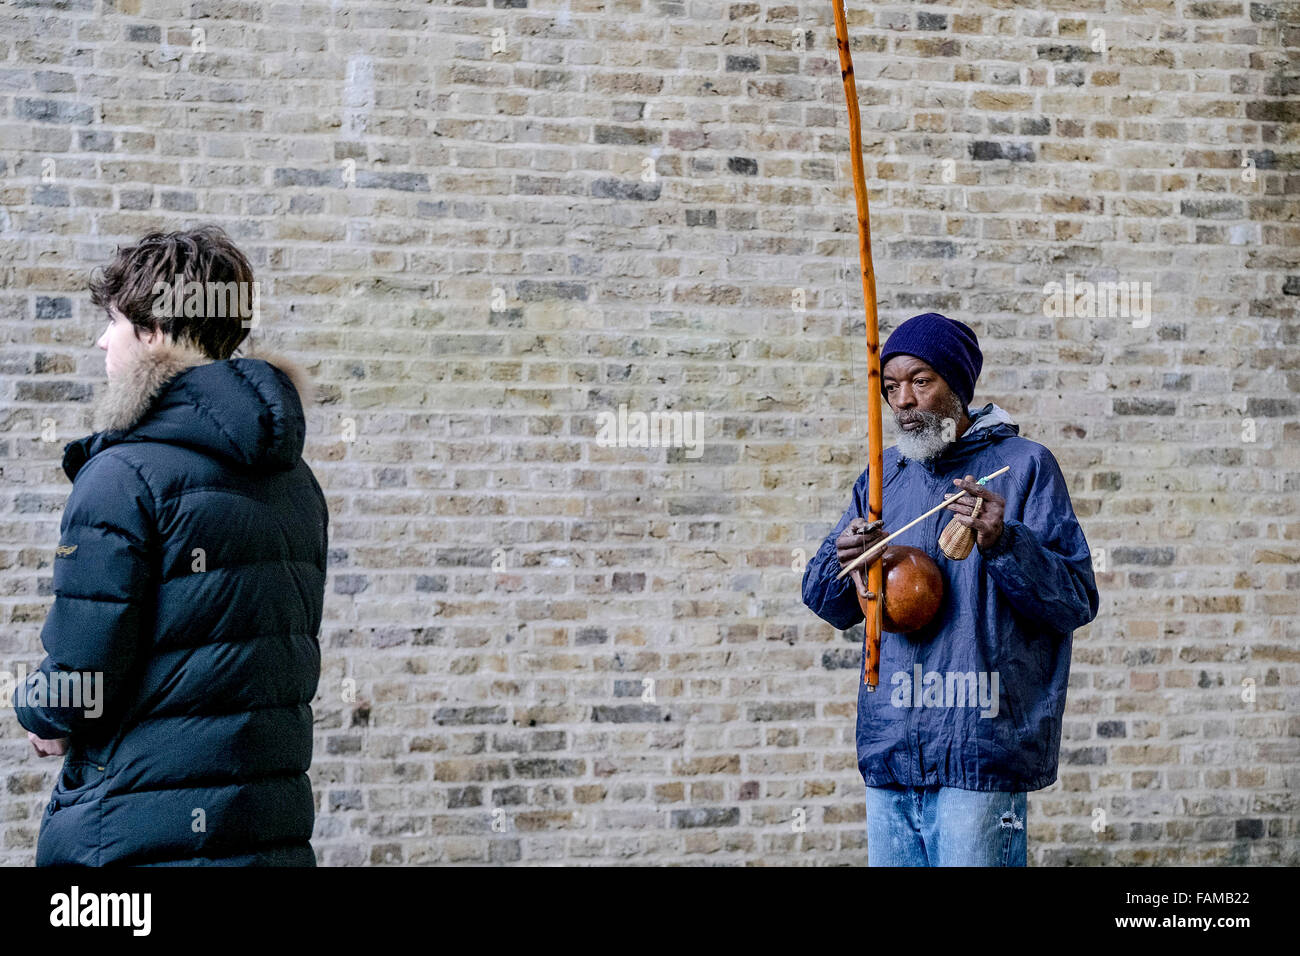 On the South Bank in London a busker, Rabimsha plays a berimbau, a traditional African/Brazilian instrument. Stock Photo